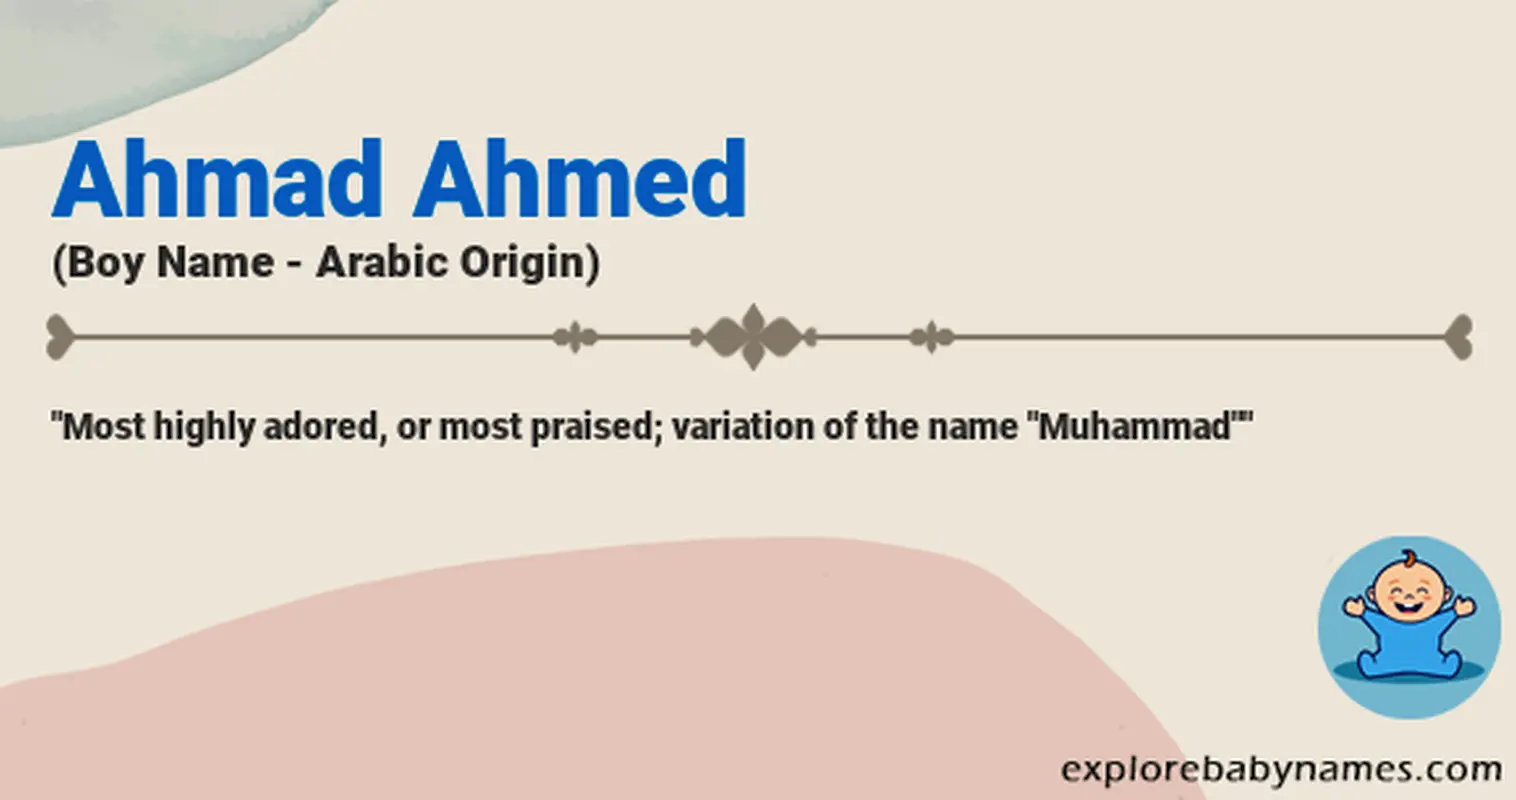 Meaning of Ahmad Ahmed